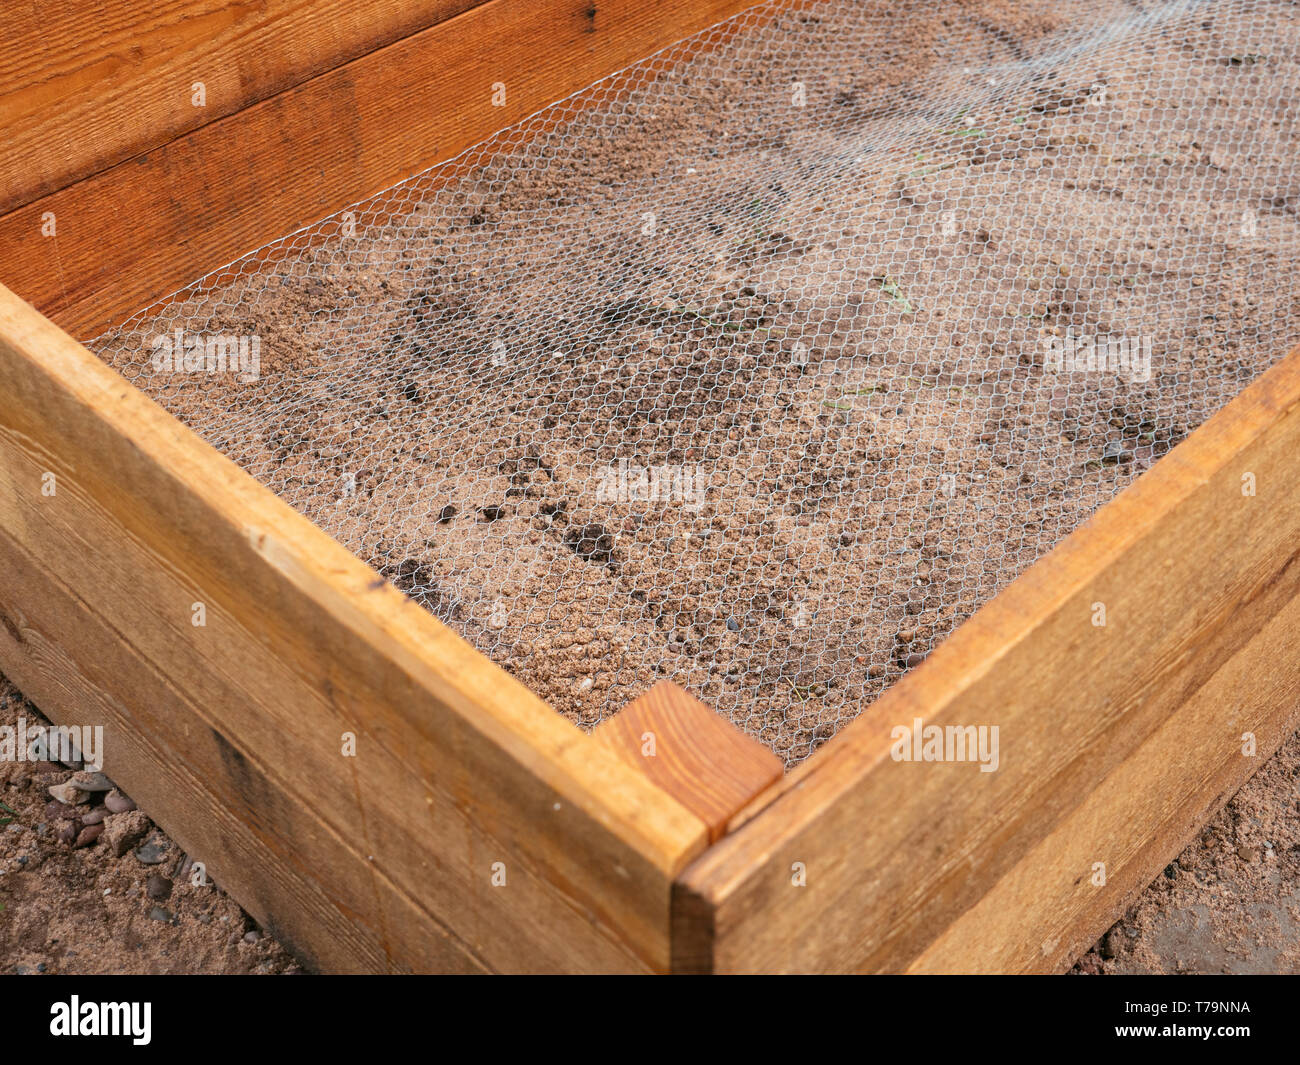 Raised bed lined with chicken wire to keep gophers, voles and moles out. Stock Photo